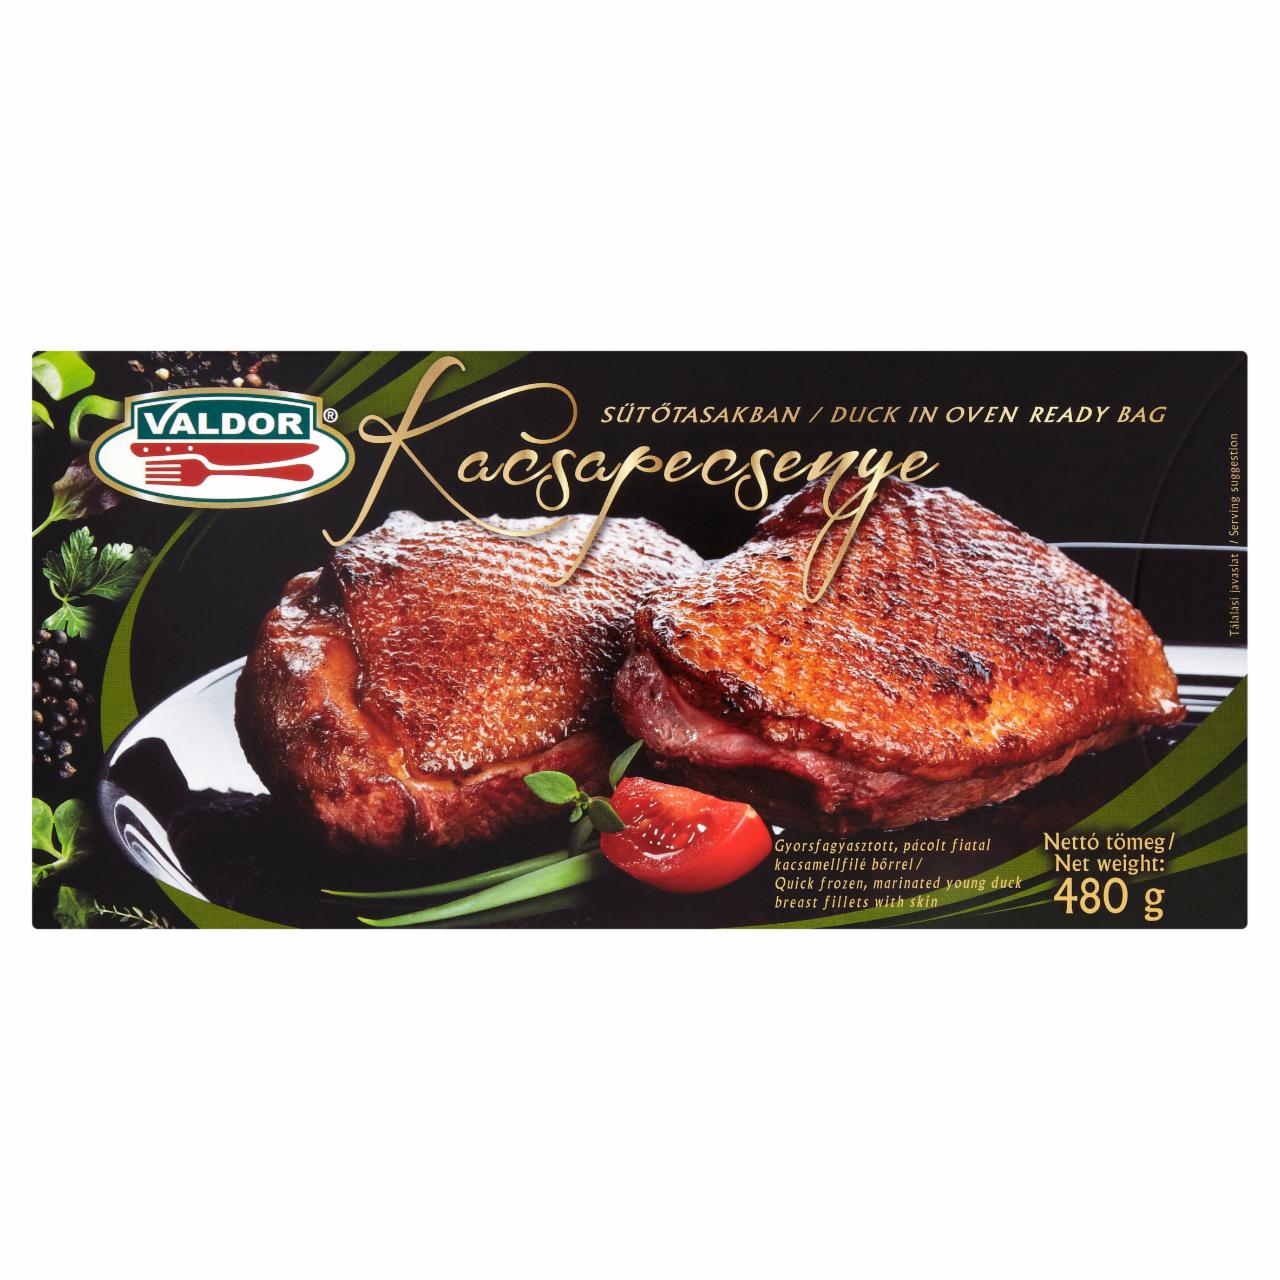 Photo - Valdor Kacsapecsenye Quick-Frozen Marinated Duck Breast Fillets with Skin in Oven Ready Bag 480 g